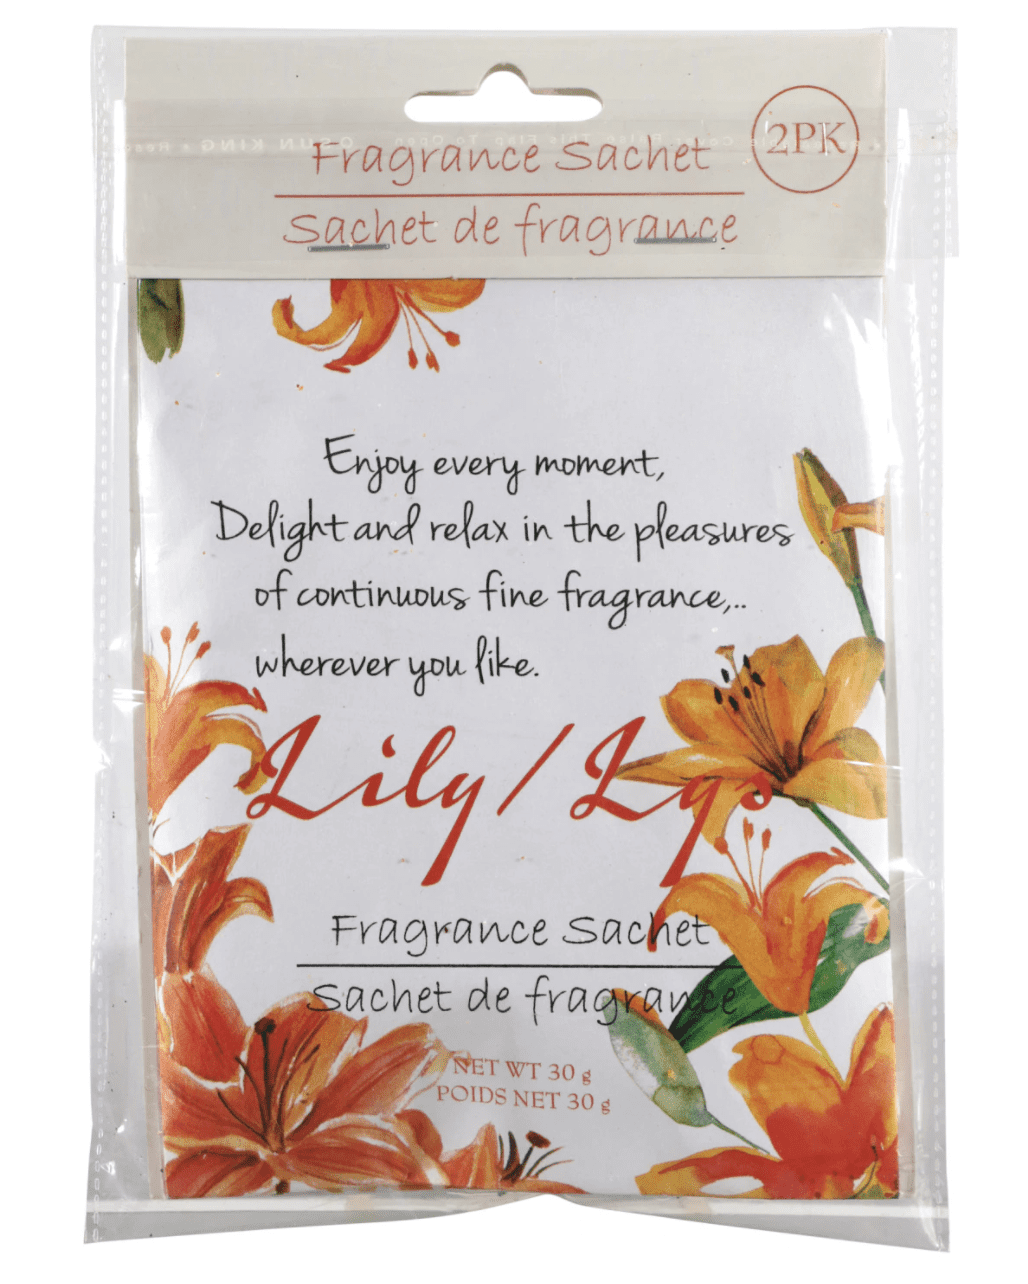 scented sachets